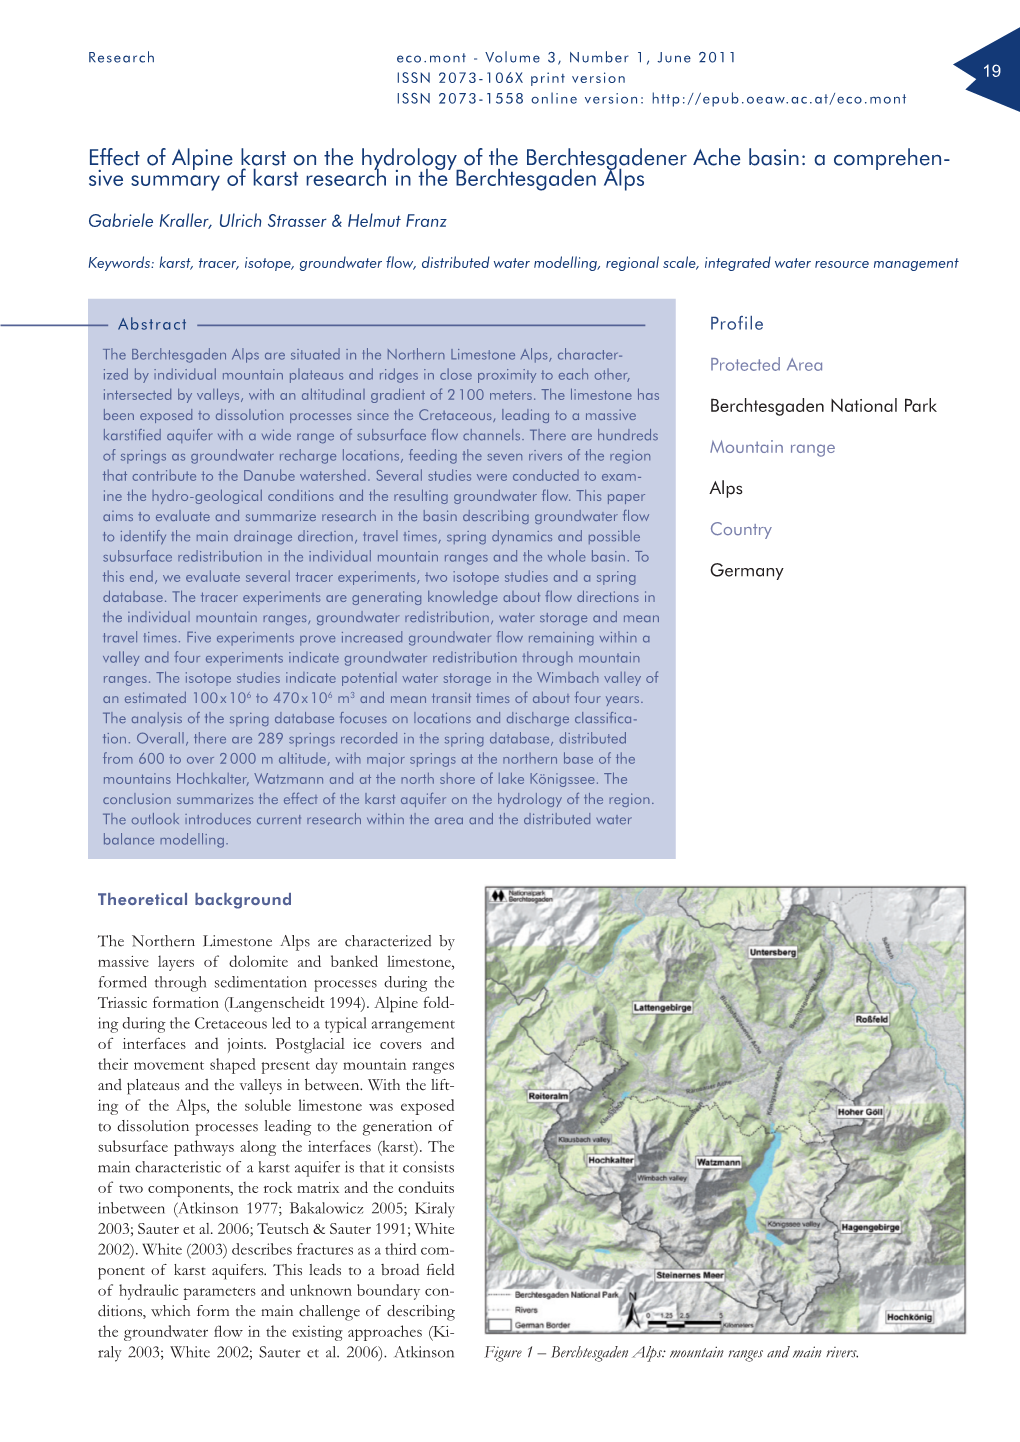 Effect of Alpine Karst on the Hydrology of the Berchtesgadener Ache Basin: a Comprehen- Sive Summary of Karst Research in the Berchtesgaden Alps